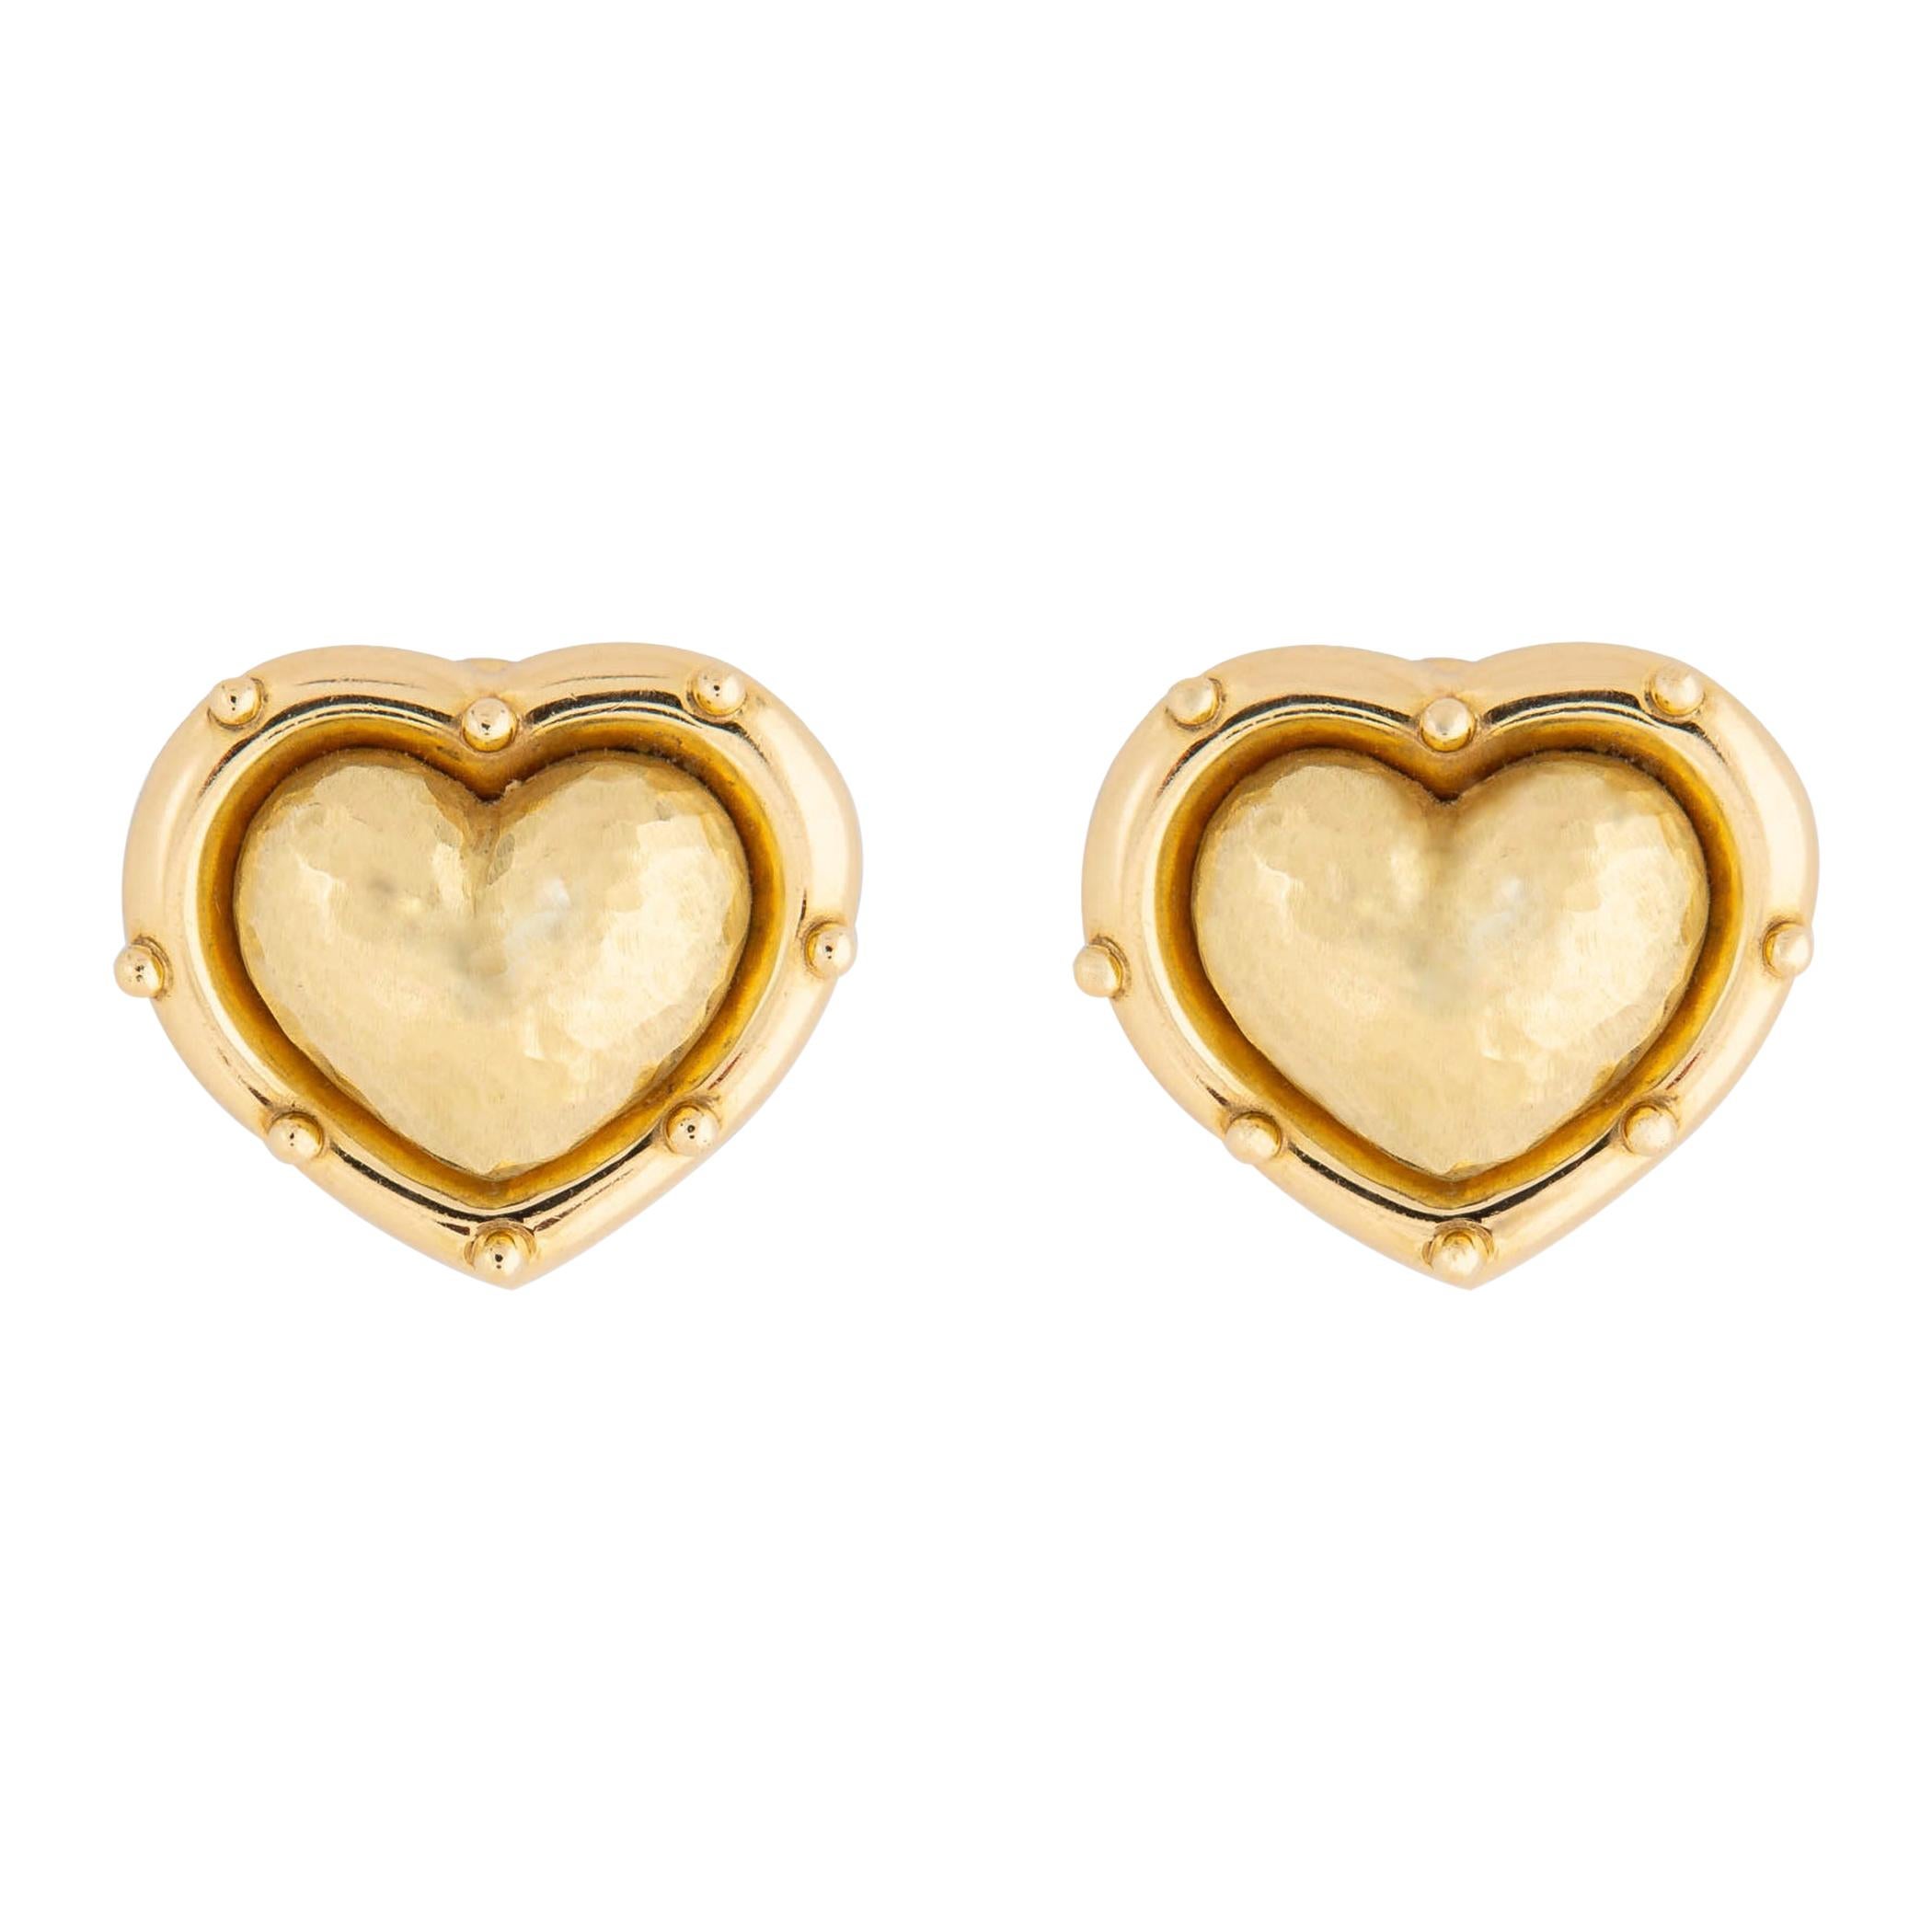 Paloma Picasso for Tiffany & Co. Gold Heart Motif Earrings